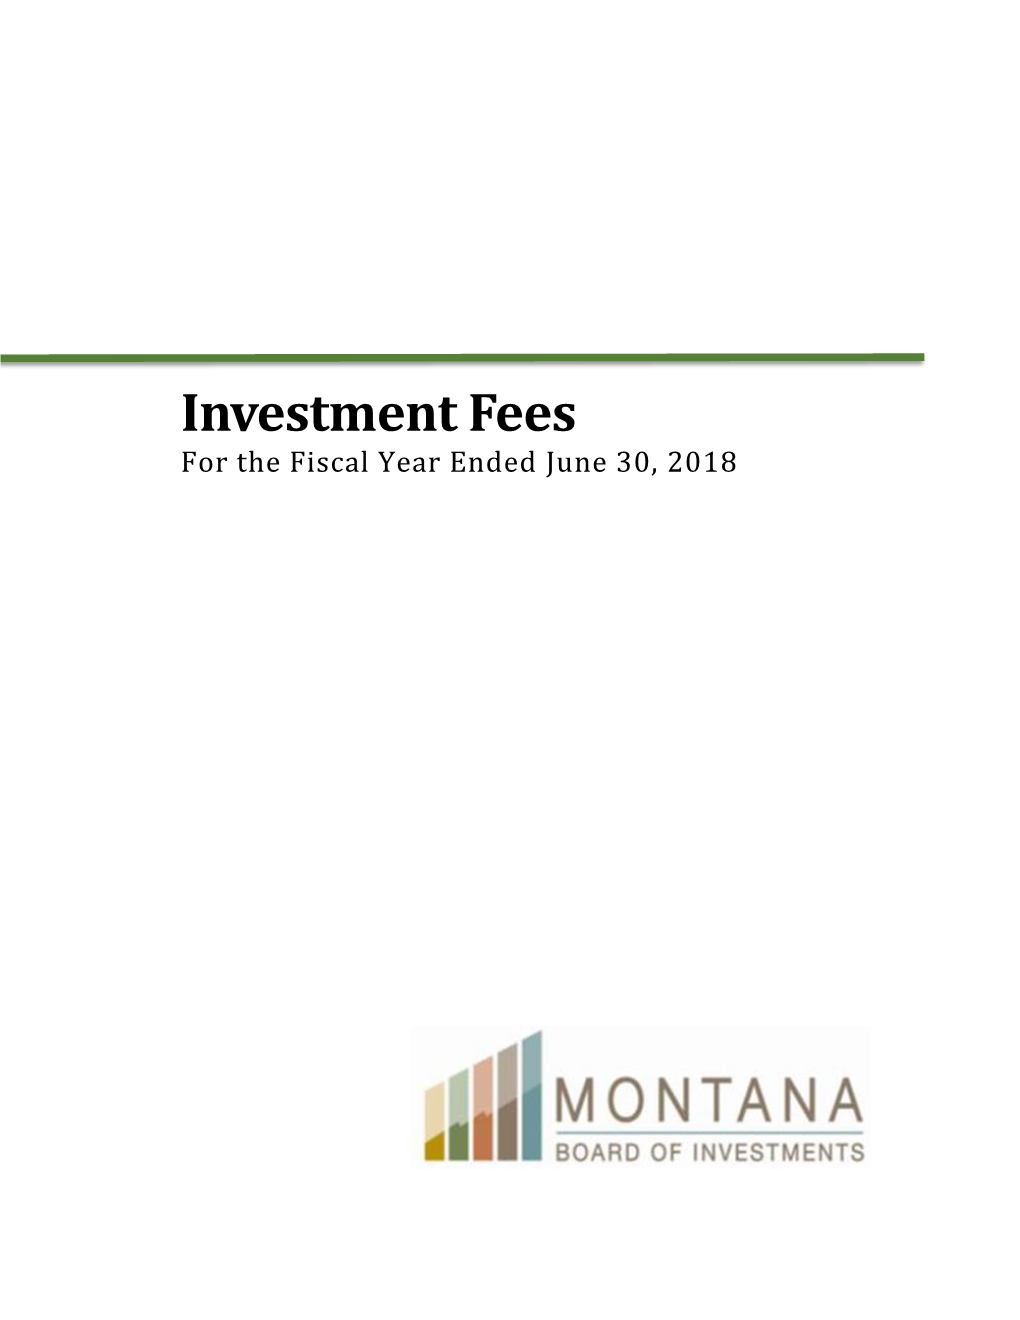 Investment Fees for the Fiscal Year Ended June 30, 2018 Transparency of the Montana Investment Expenses